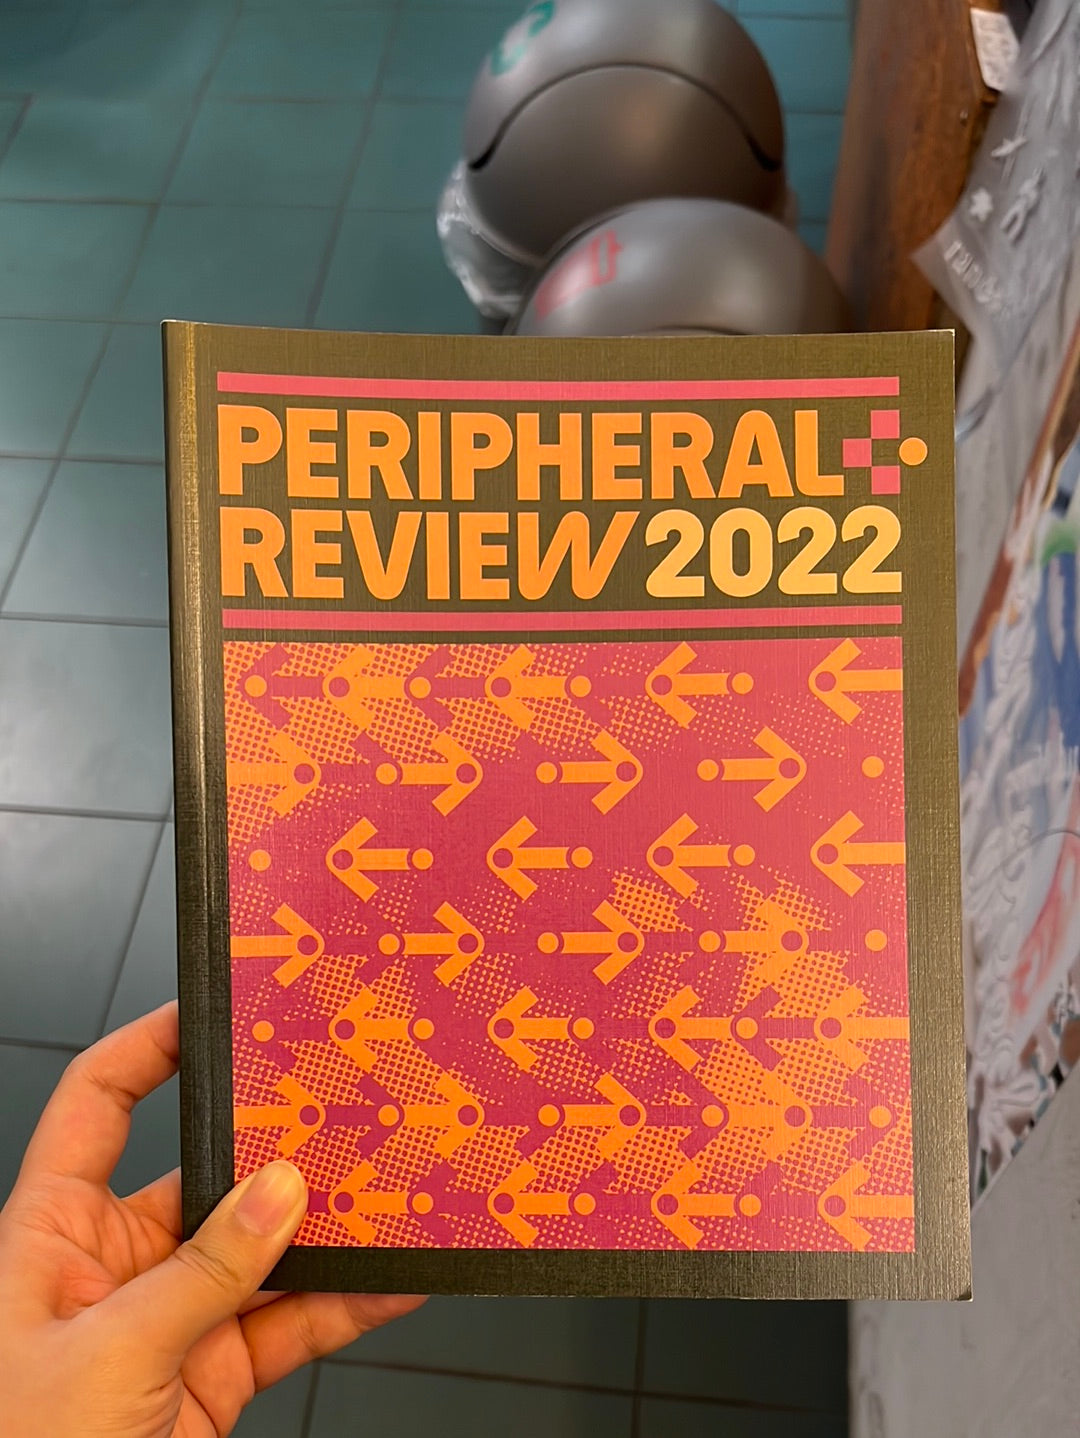 Peripheral Review 2022